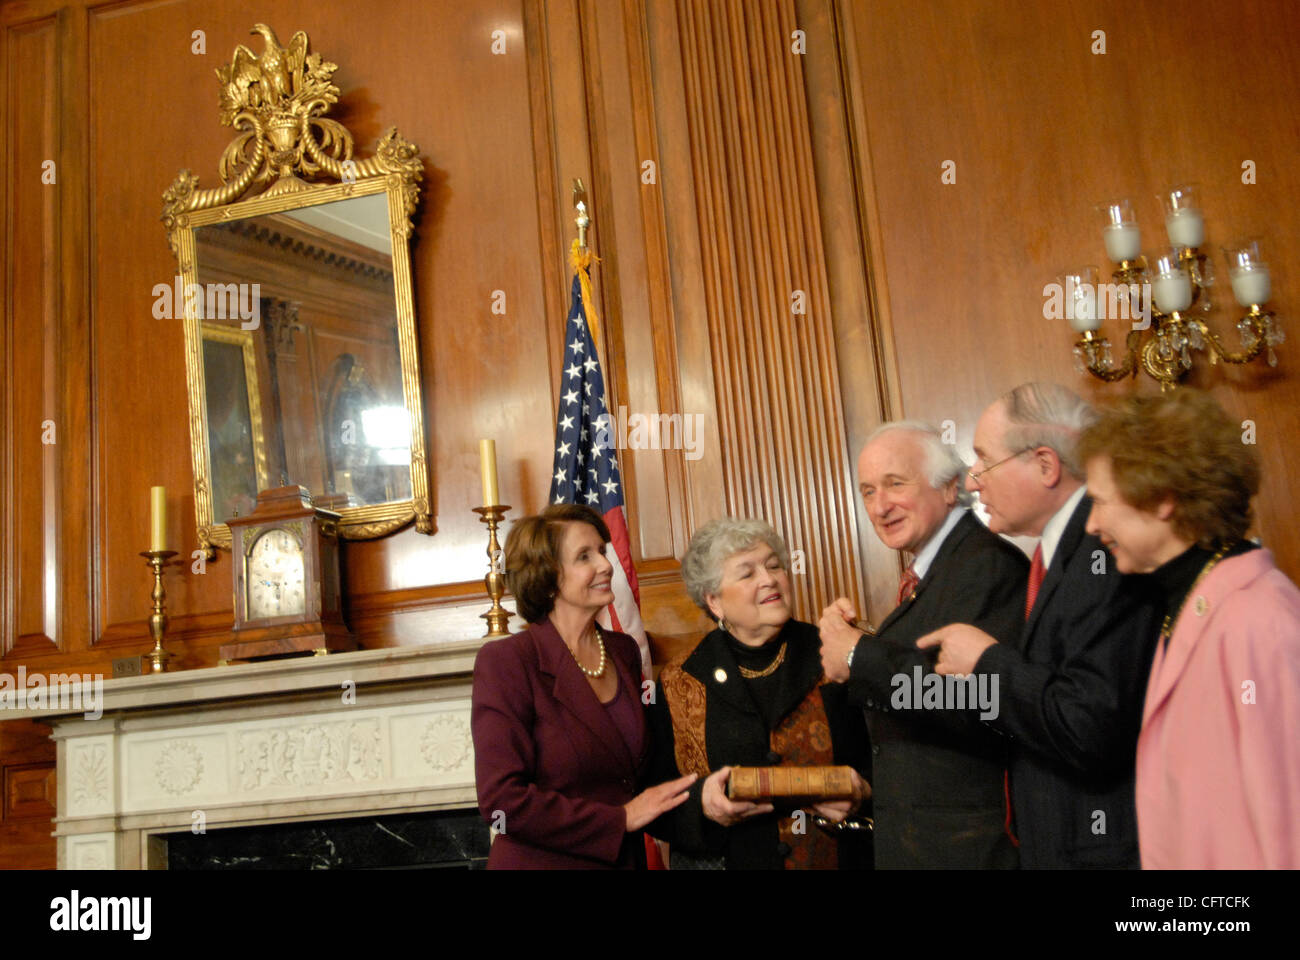 Jan 04, 2007 - Washington, DC, USA - Speaker of the House NANCY PELOSI swears in Rep. SANDERS LEVIN (D-MI) for the 110th Congress. Sanders was joined by his brother Carl, who serves as a Senator from Michigan. Stock Photo